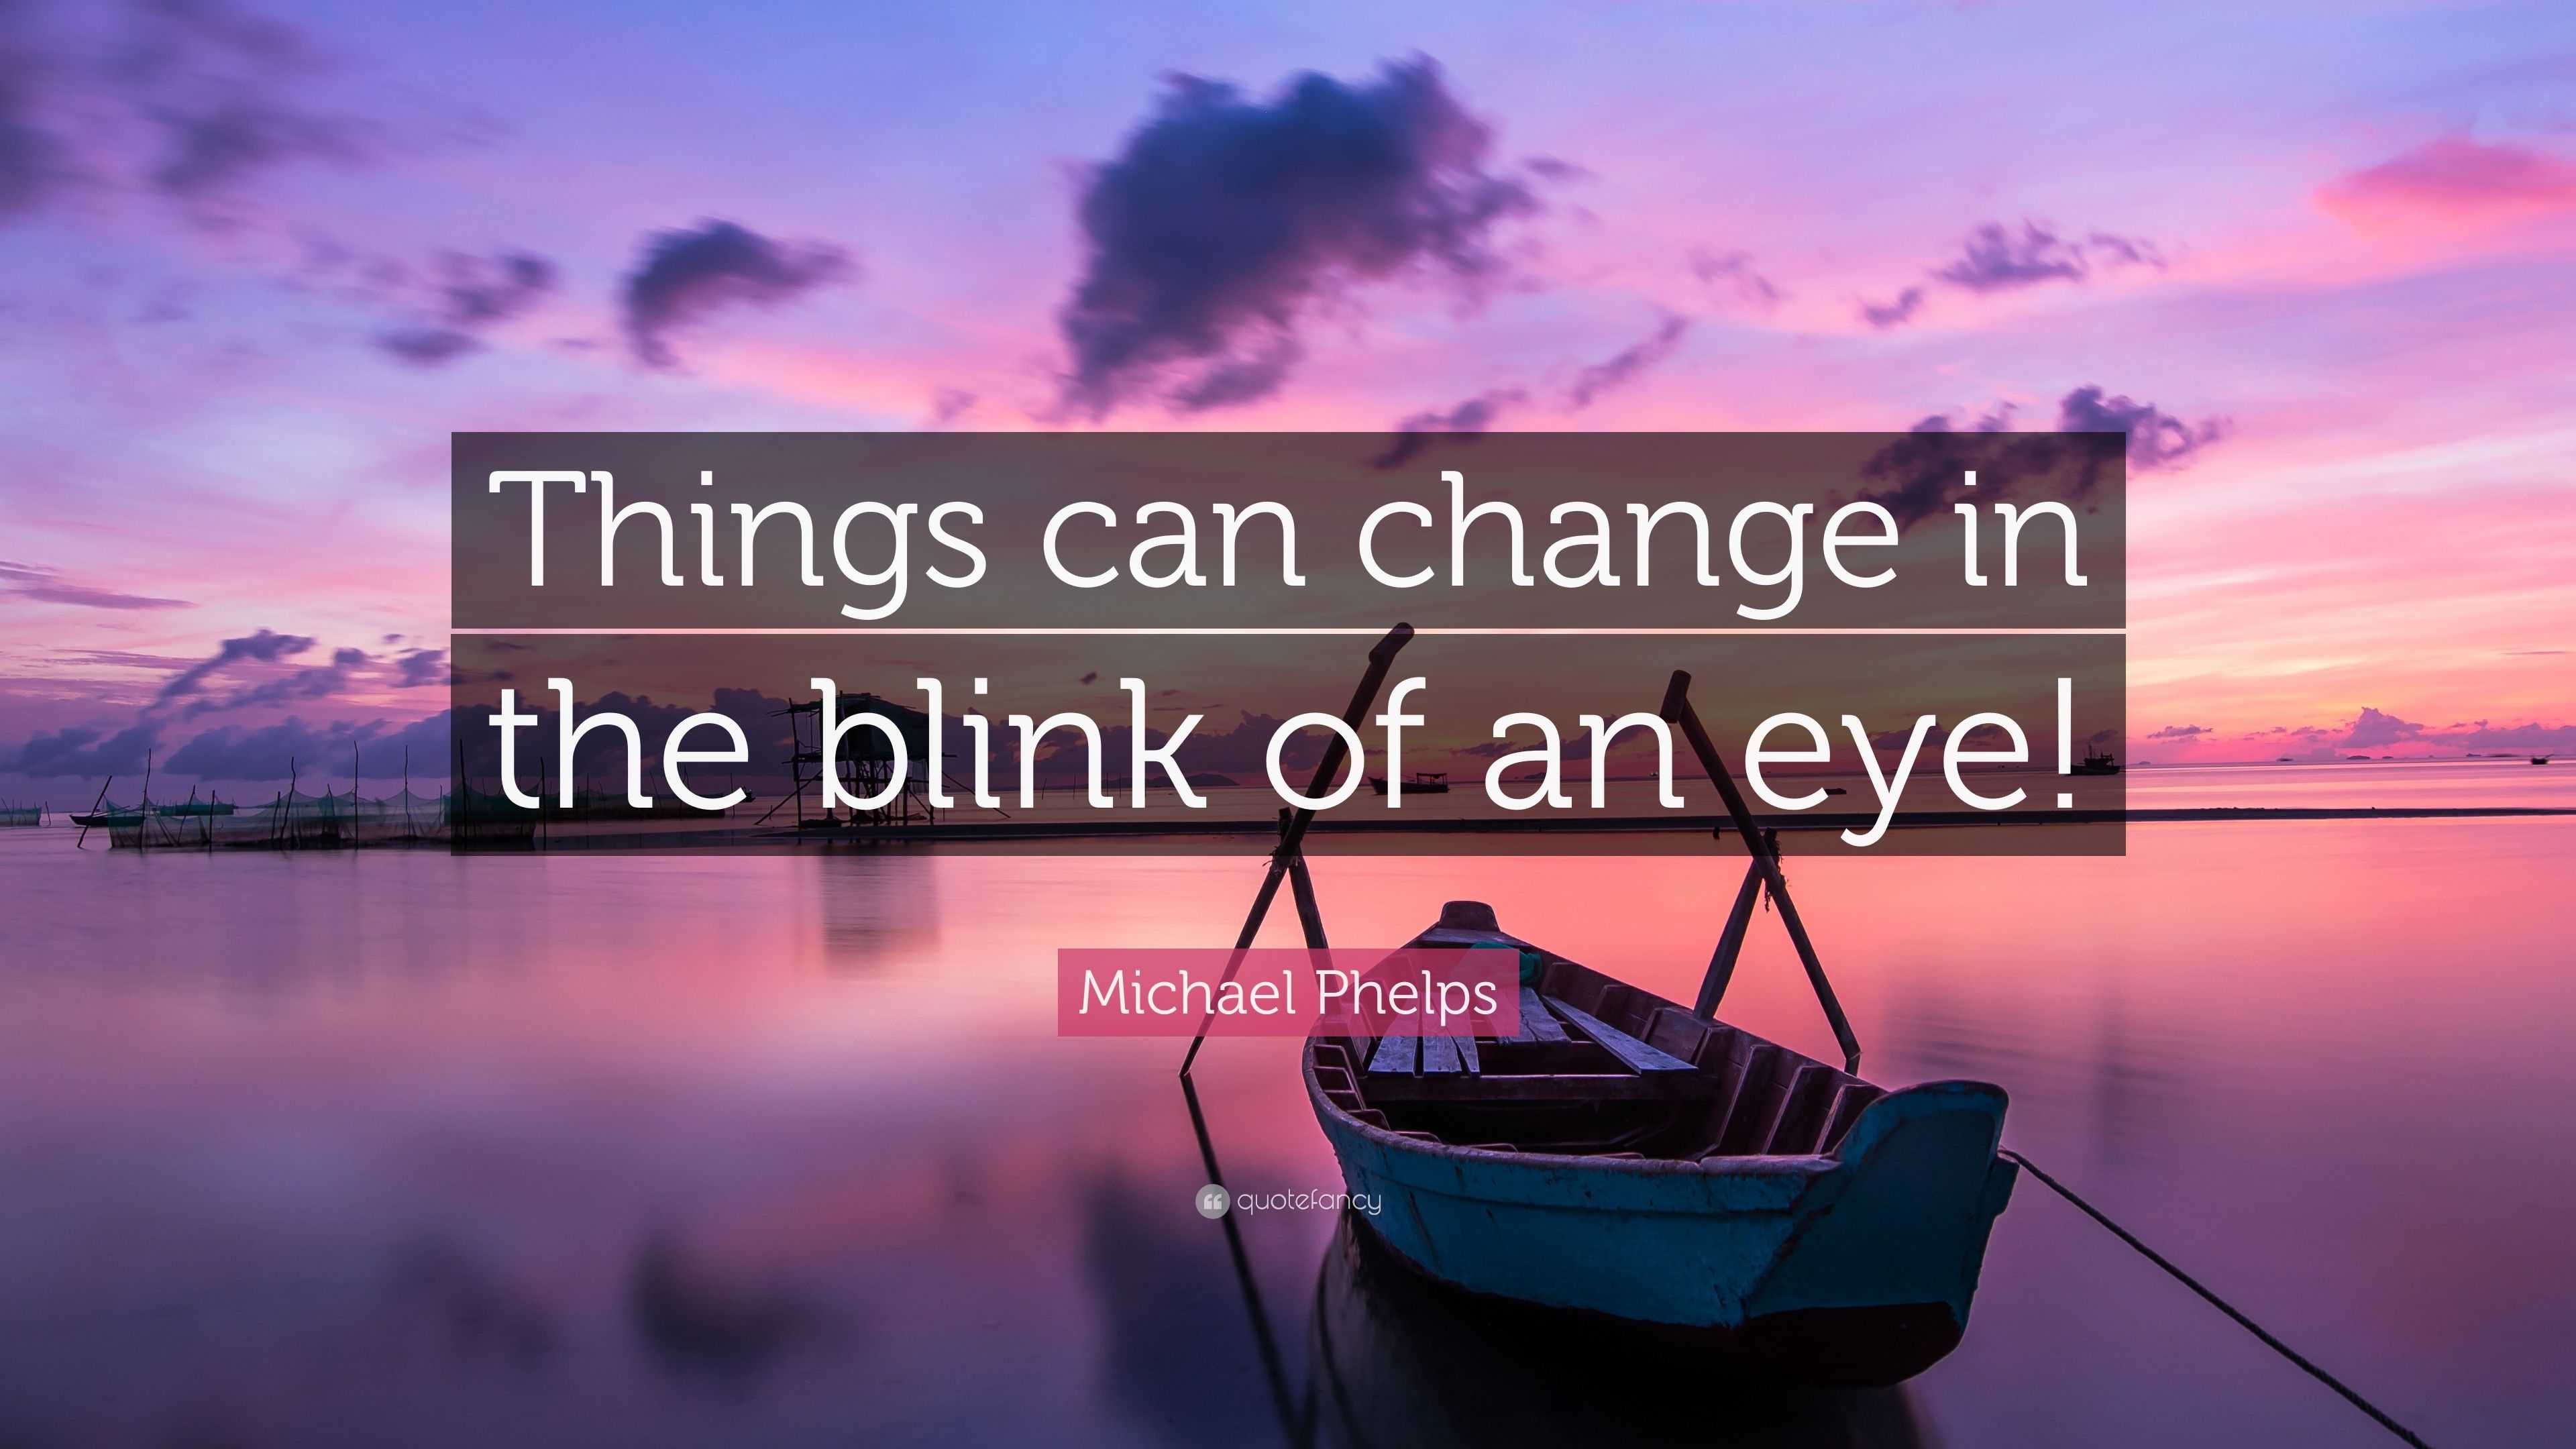 Michael Phelps Quote: “Things can change in the blink of an eye!”